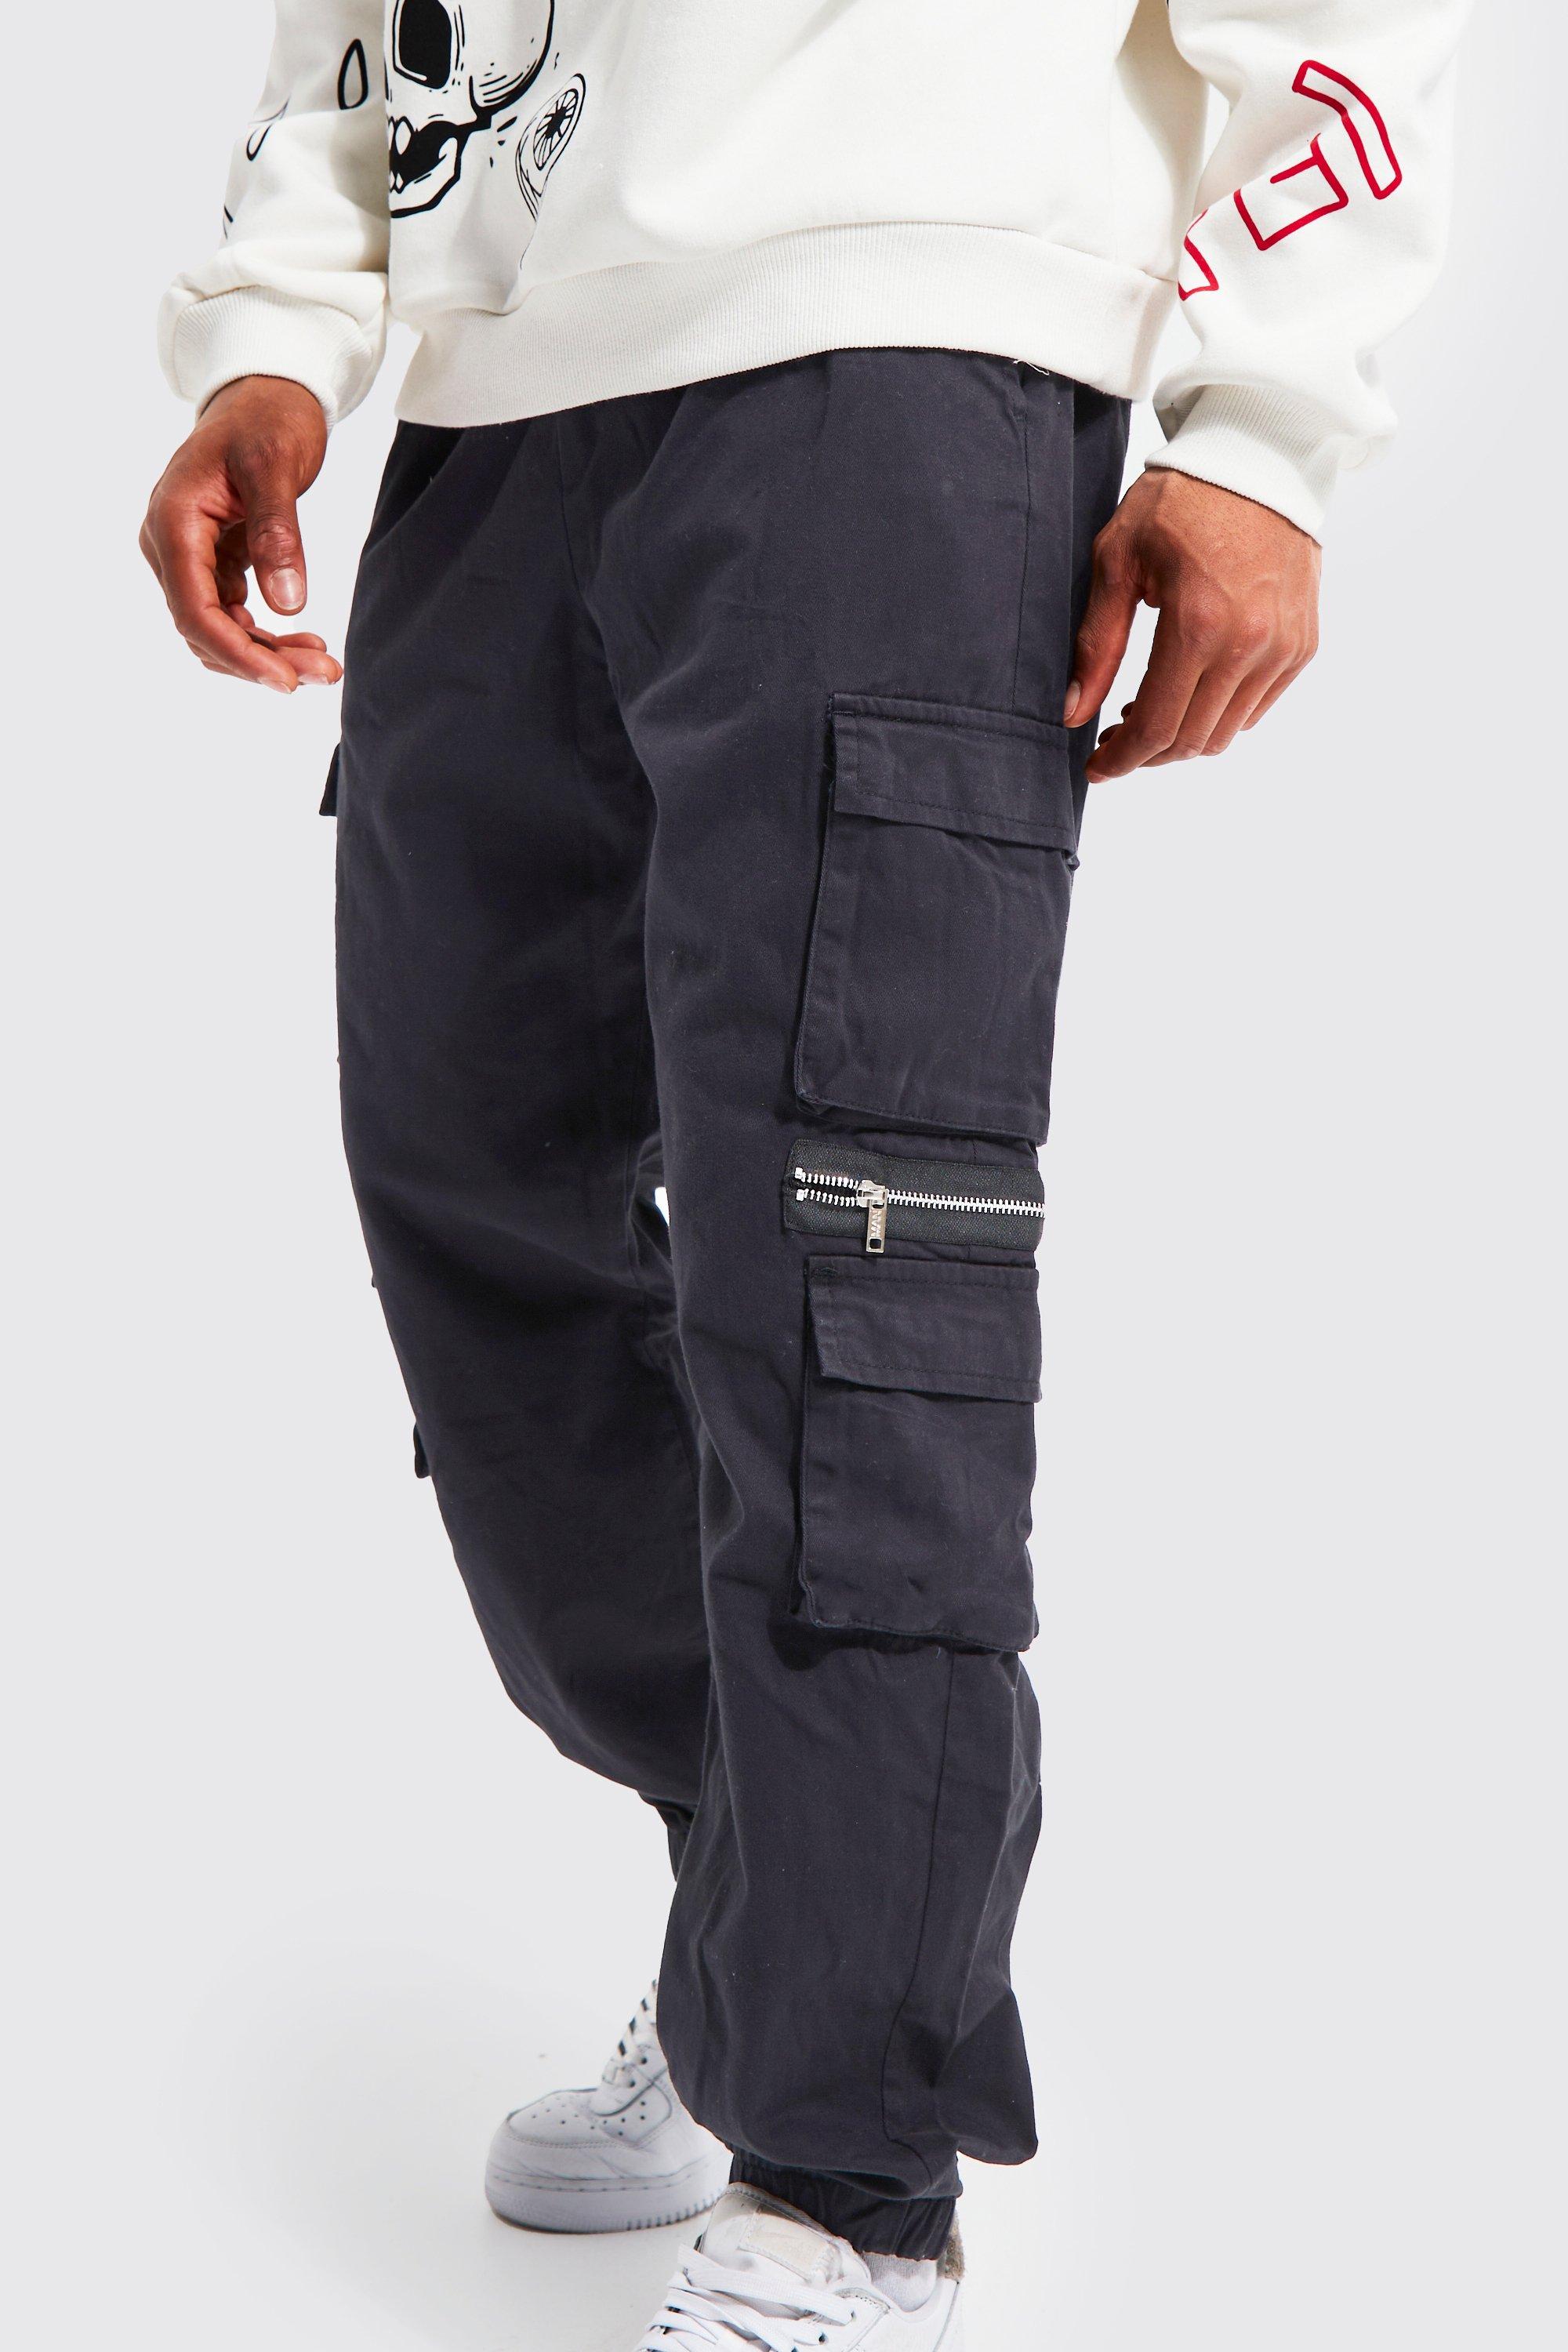 Pink comfort cargo pants with zip pockets and stretch waist